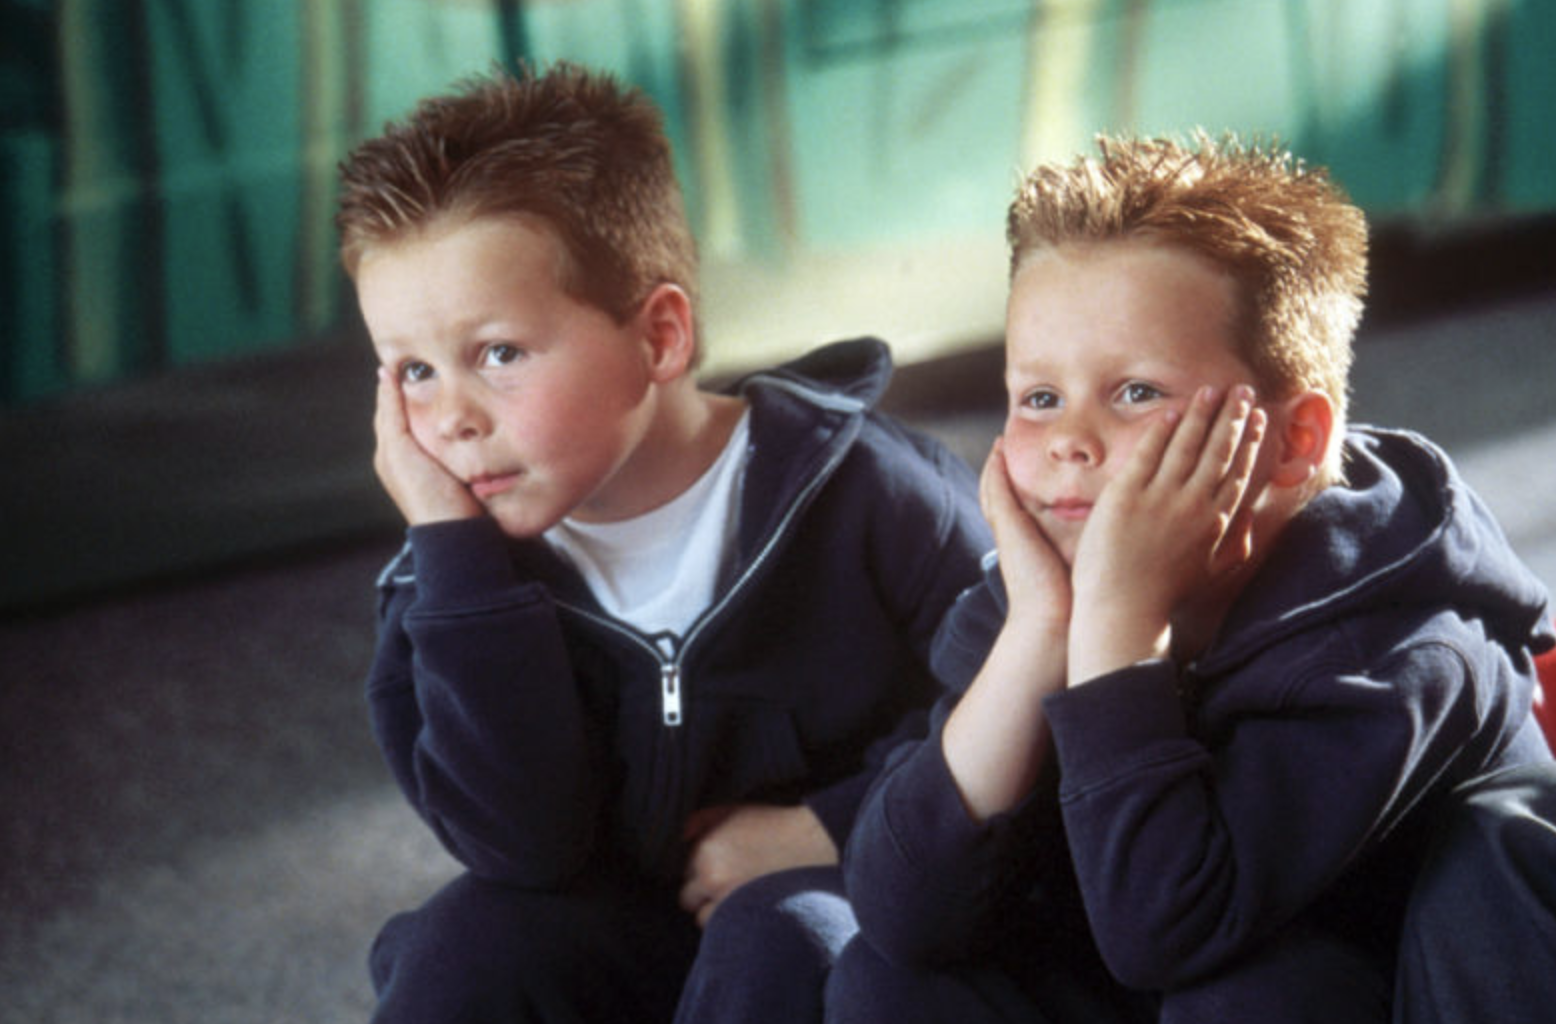 Cheaper By The Dozen Twins Kyle and Nigel Baker from a movie still